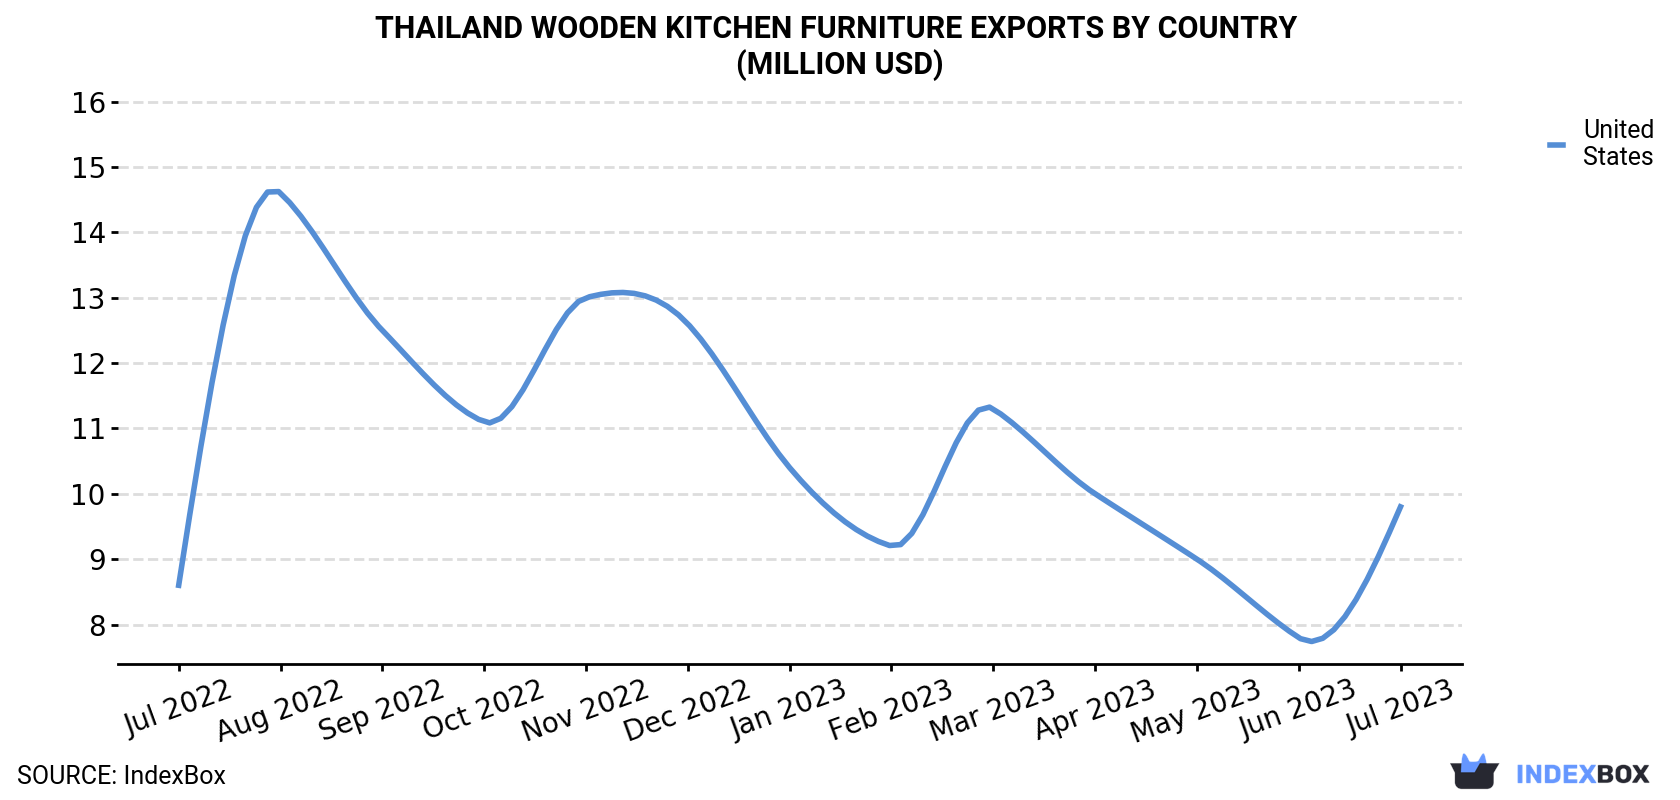 Thailand Wooden Kitchen Furniture Exports By Country (Million USD)